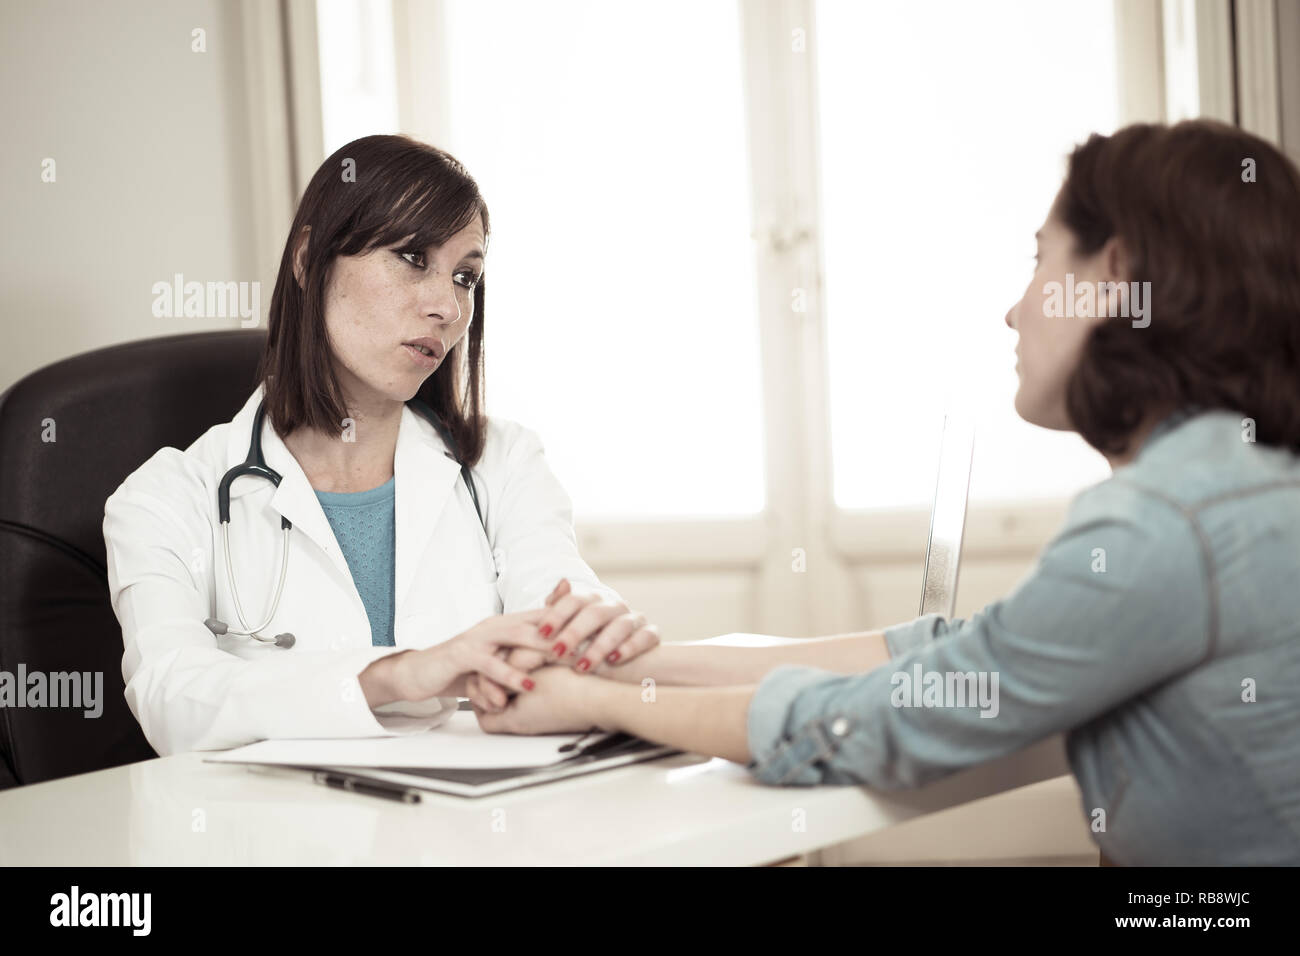 Female doctor discussing diagnosis with woman patient reassuring and comforting her with empathy in hospital office for Partnership Trust, Medical eth Stock Photo